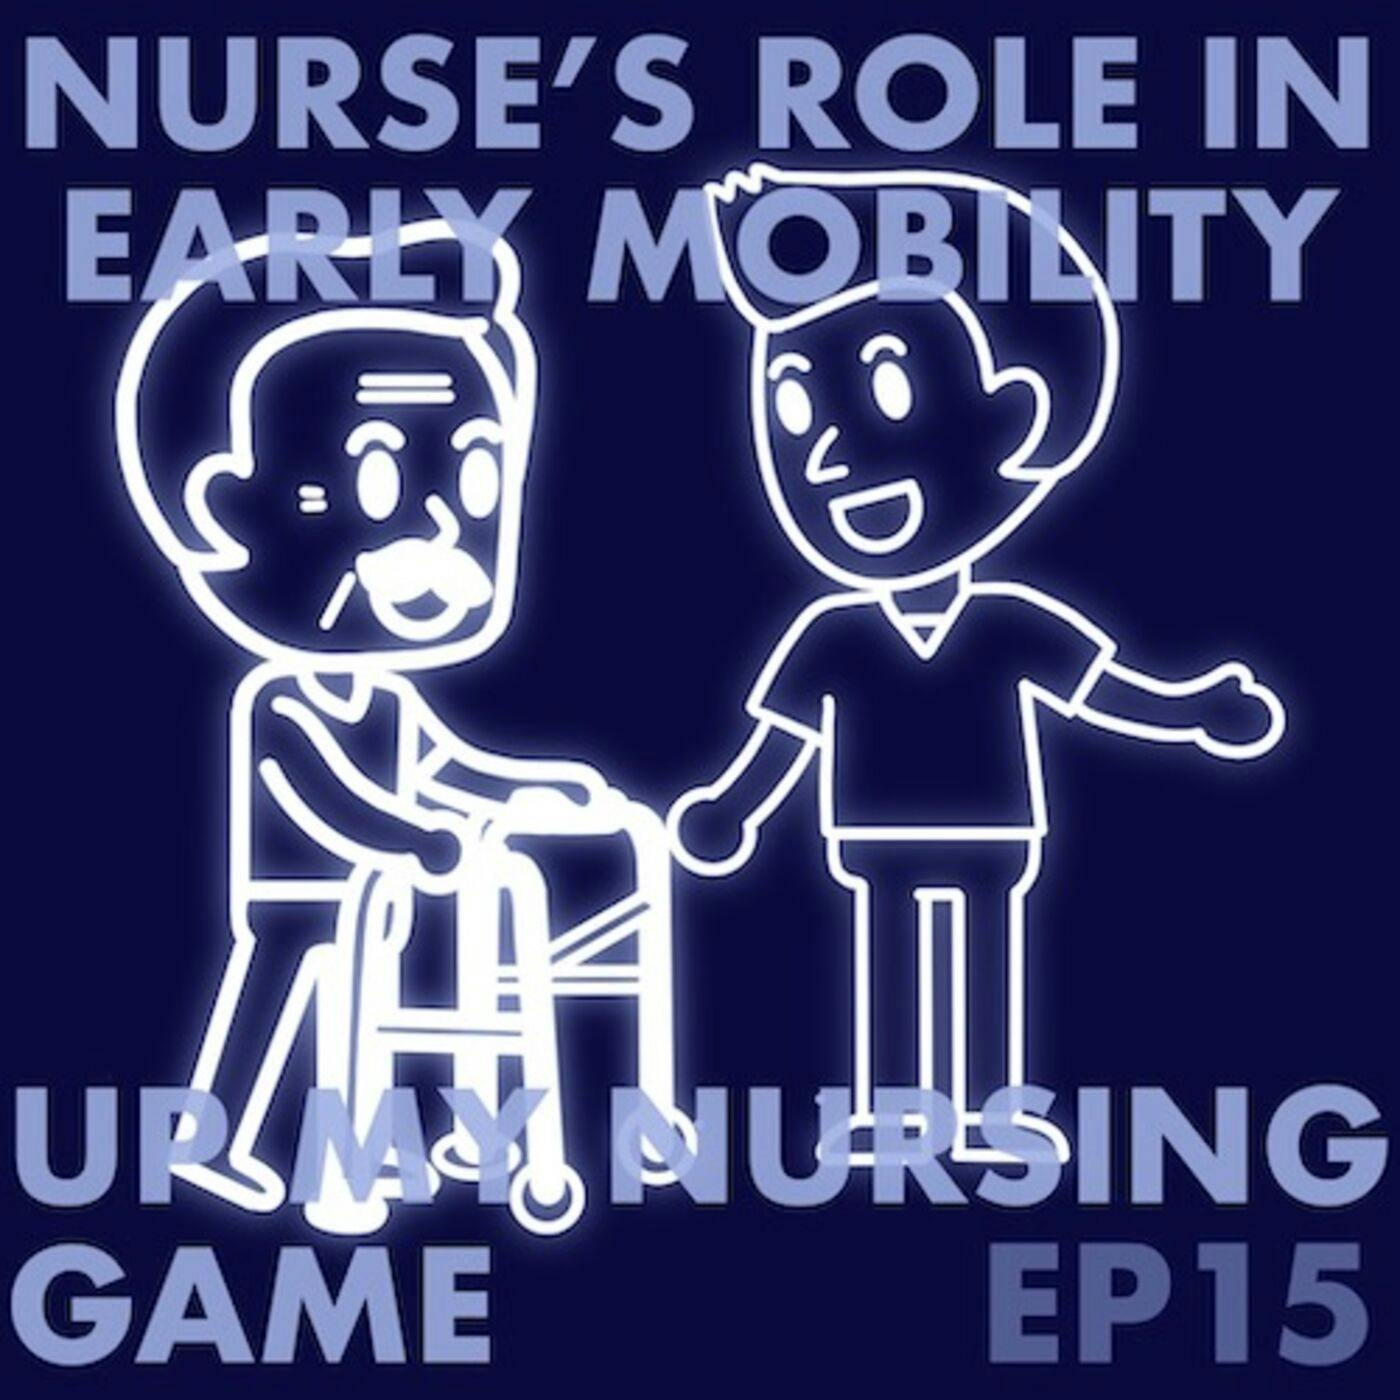 The Nurse’s Role in Early Mobility with Heidi Engel, PT, DPT